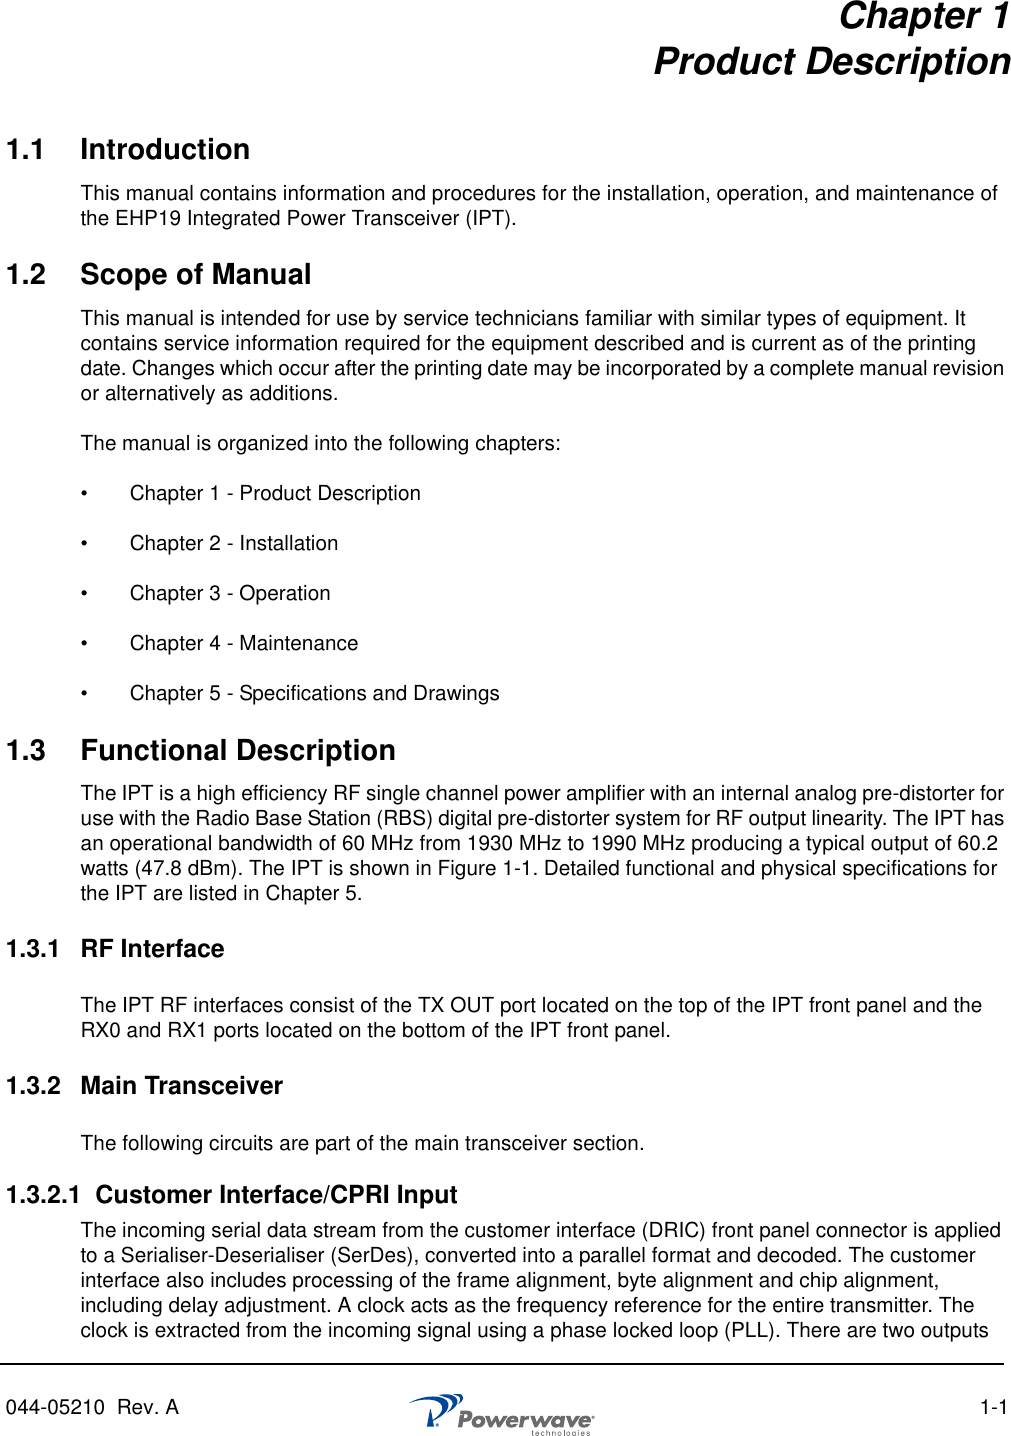 044-05210  Rev. A  1-1Chapter 1Product Description1.1 IntroductionThis manual contains information and procedures for the installation, operation, and maintenance of the EHP19 Integrated Power Transceiver (IPT).1.2 Scope of ManualThis manual is intended for use by service technicians familiar with similar types of equipment. It contains service information required for the equipment described and is current as of the printing date. Changes which occur after the printing date may be incorporated by a complete manual revision or alternatively as additions.The manual is organized into the following chapters:•   Chapter 1 - Product Description•   Chapter 2 - Installation•   Chapter 3 - Operation•   Chapter 4 - Maintenance•   Chapter 5 - Specifications and Drawings1.3 Functional DescriptionThe IPT is a high efficiency RF single channel power amplifier with an internal analog pre-distorter for use with the Radio Base Station (RBS) digital pre-distorter system for RF output linearity. The IPT has an operational bandwidth of 60 MHz from 1930 MHz to 1990 MHz producing a typical output of 60.2 watts (47.8 dBm). The IPT is shown in Figure 1-1. Detailed functional and physical specifications for the IPT are listed in Chapter 5.1.3.1 RF InterfaceThe IPT RF interfaces consist of the TX OUT port located on the top of the IPT front panel and the RX0 and RX1 ports located on the bottom of the IPT front panel. 1.3.2 Main TransceiverThe following circuits are part of the main transceiver section.1.3.2.1 Customer Interface/CPRI InputThe incoming serial data stream from the customer interface (DRIC) front panel connector is applied to a Serialiser-Deserialiser (SerDes), converted into a parallel format and decoded. The customer interface also includes processing of the frame alignment, byte alignment and chip alignment, including delay adjustment. A clock acts as the frequency reference for the entire transmitter. The clock is extracted from the incoming signal using a phase locked loop (PLL). There are two outputs 